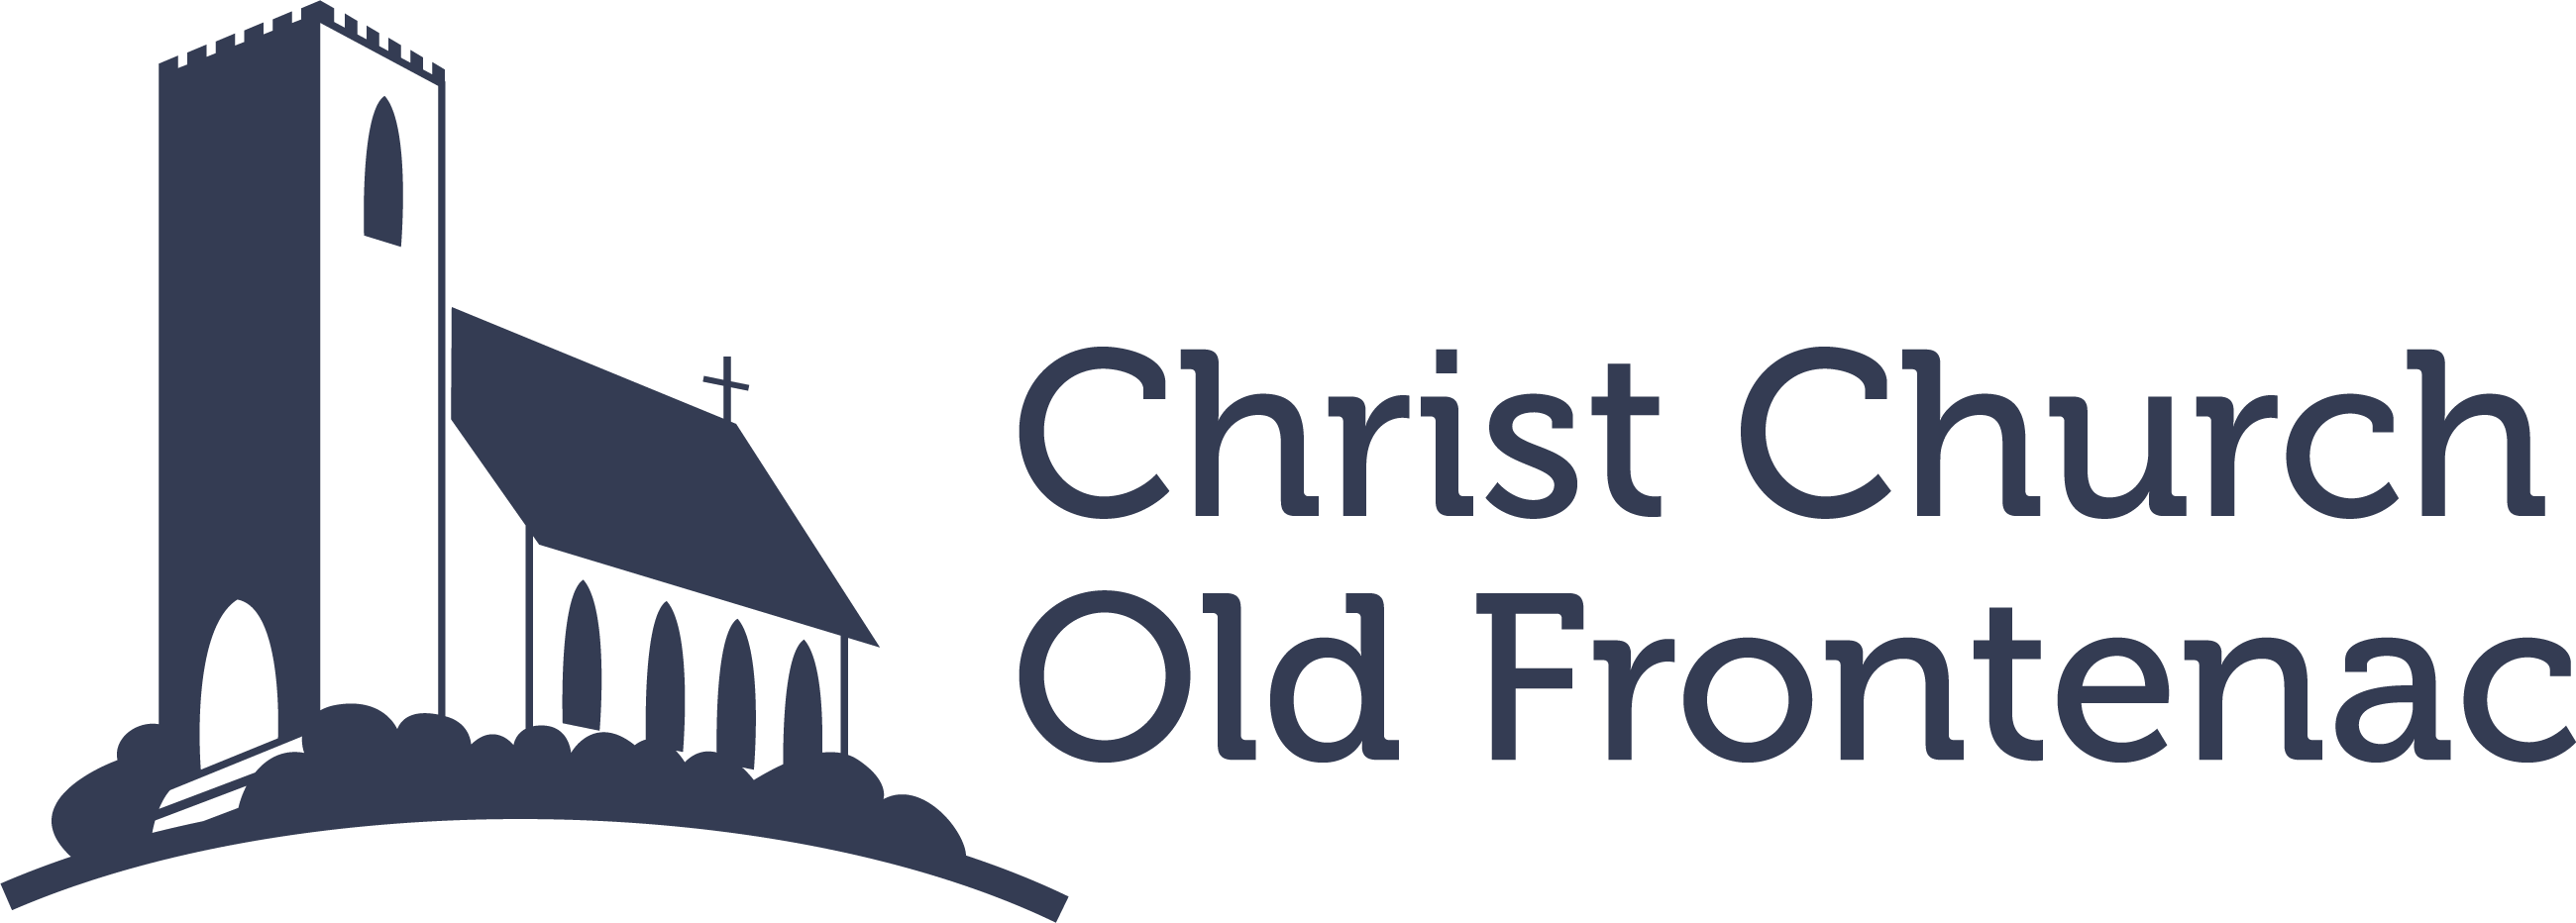 Christ Church Old Frontenac MN logo with graphic of the church exterior